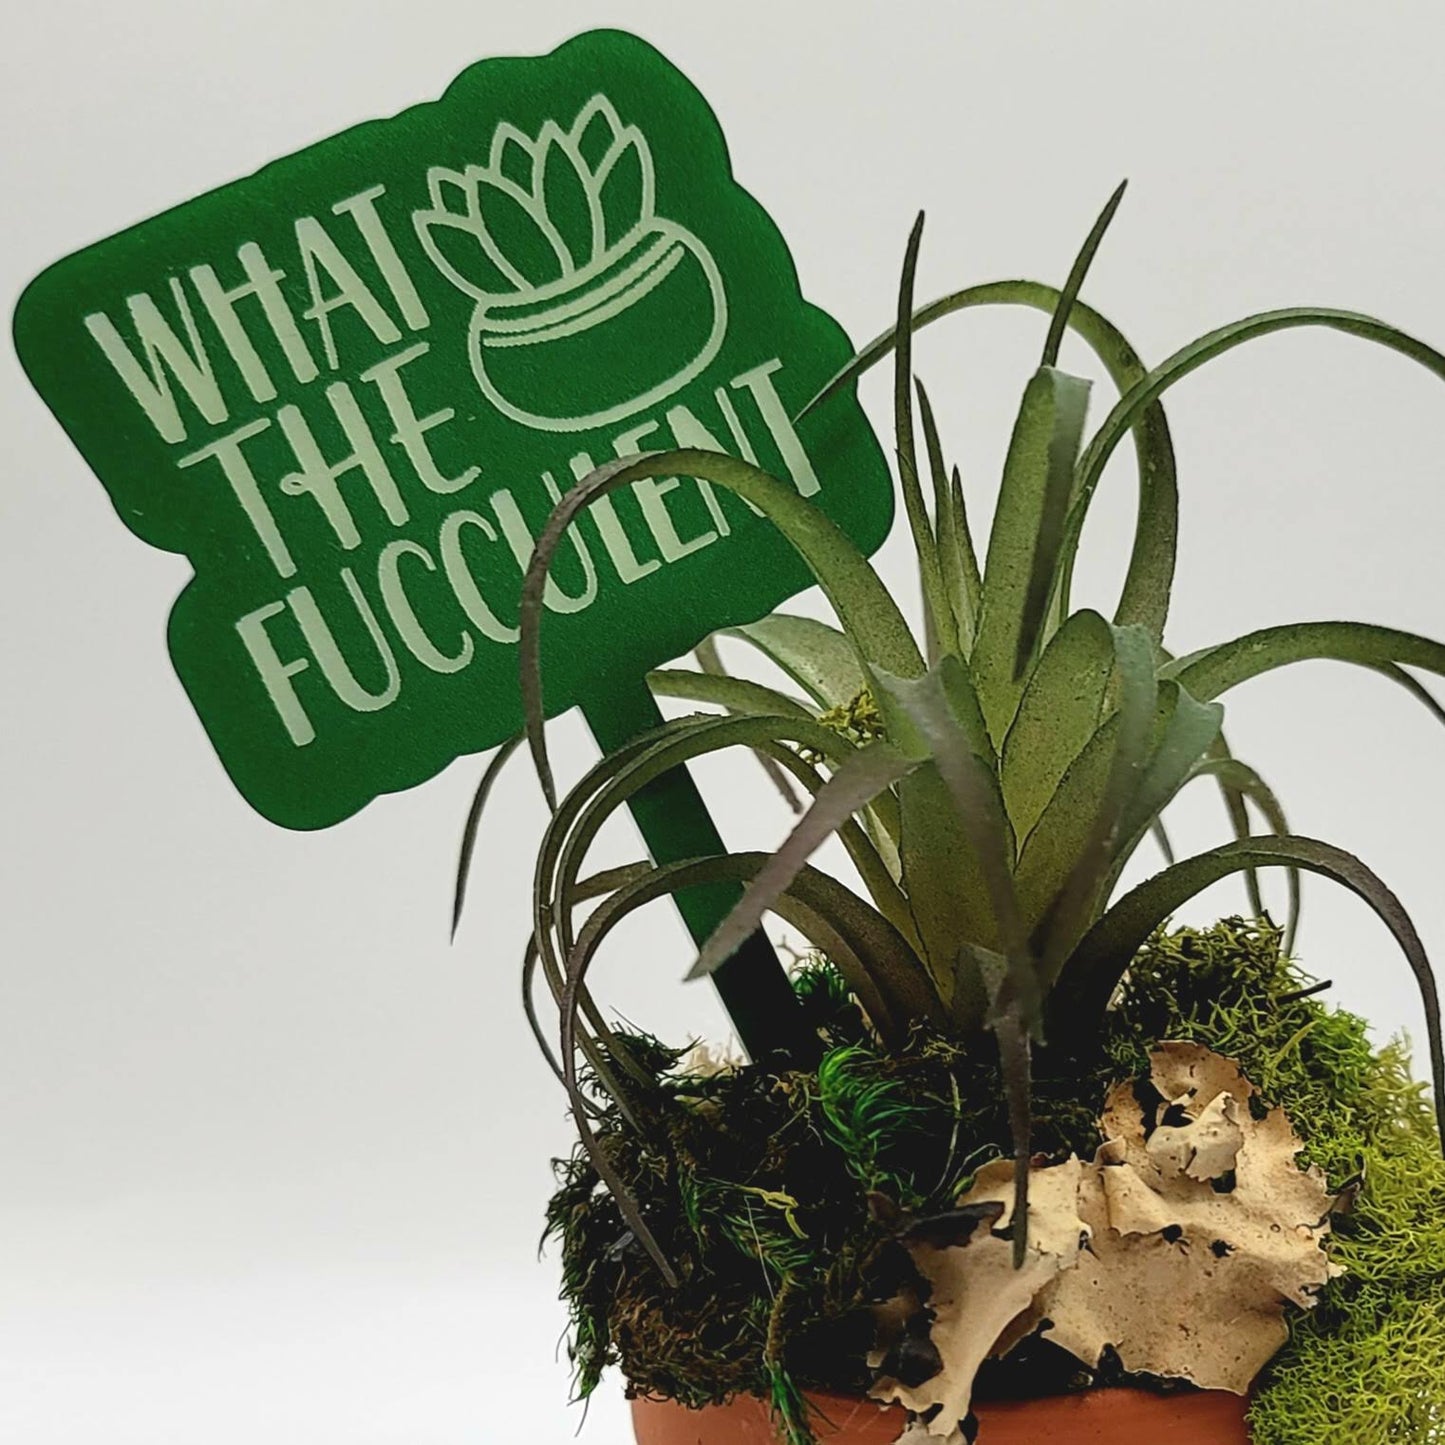 What the Fucculent! Funny Plant Stake